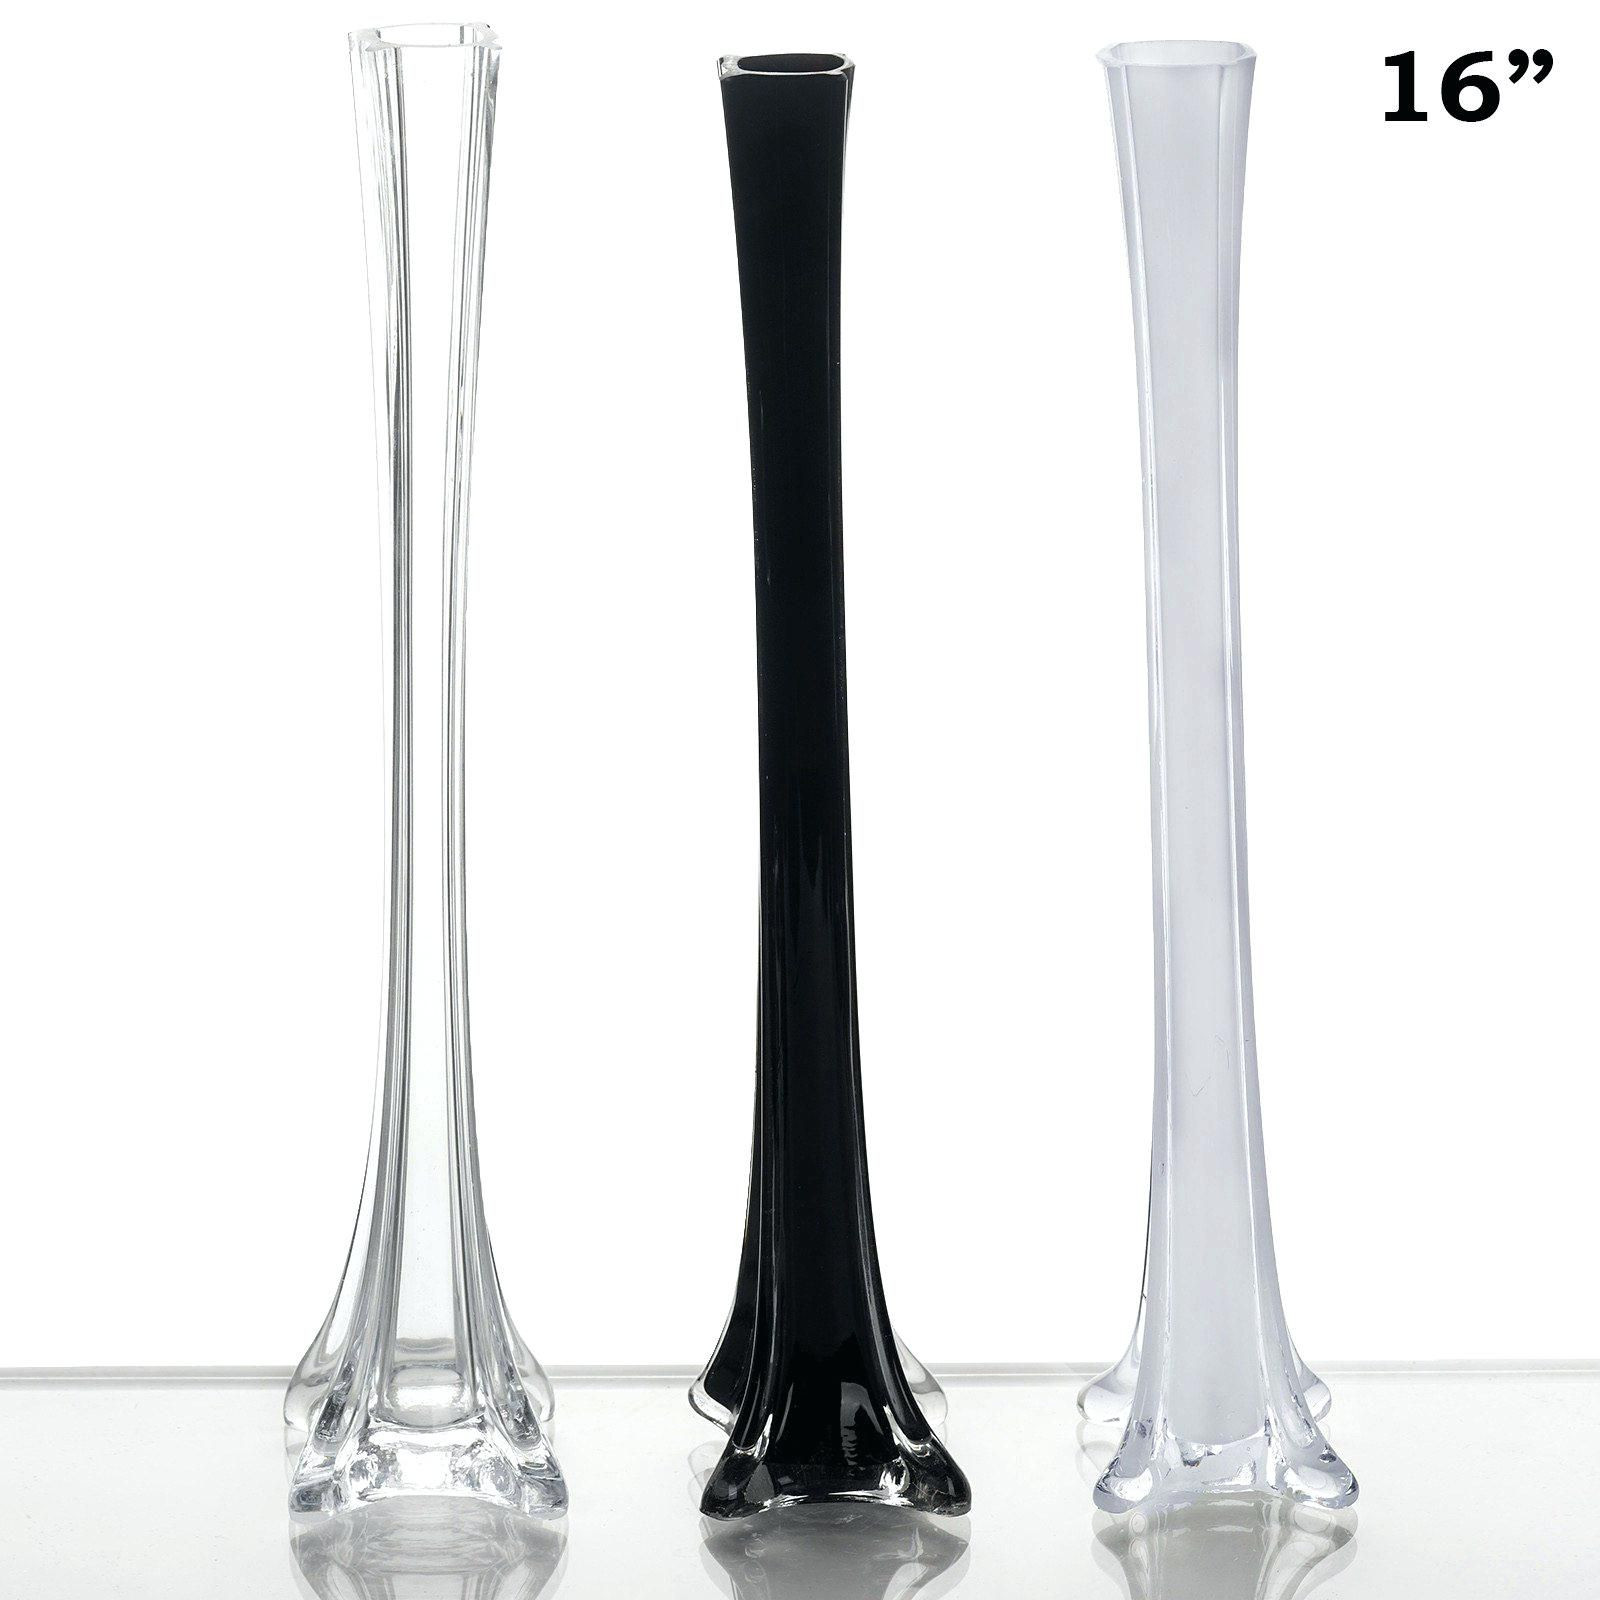 Glass Candy Vases Of 40 Glass Vases Bulk the Weekly World Inside Gallery Plastic Eiffel tower Vases wholesale Drawings Art Gallery